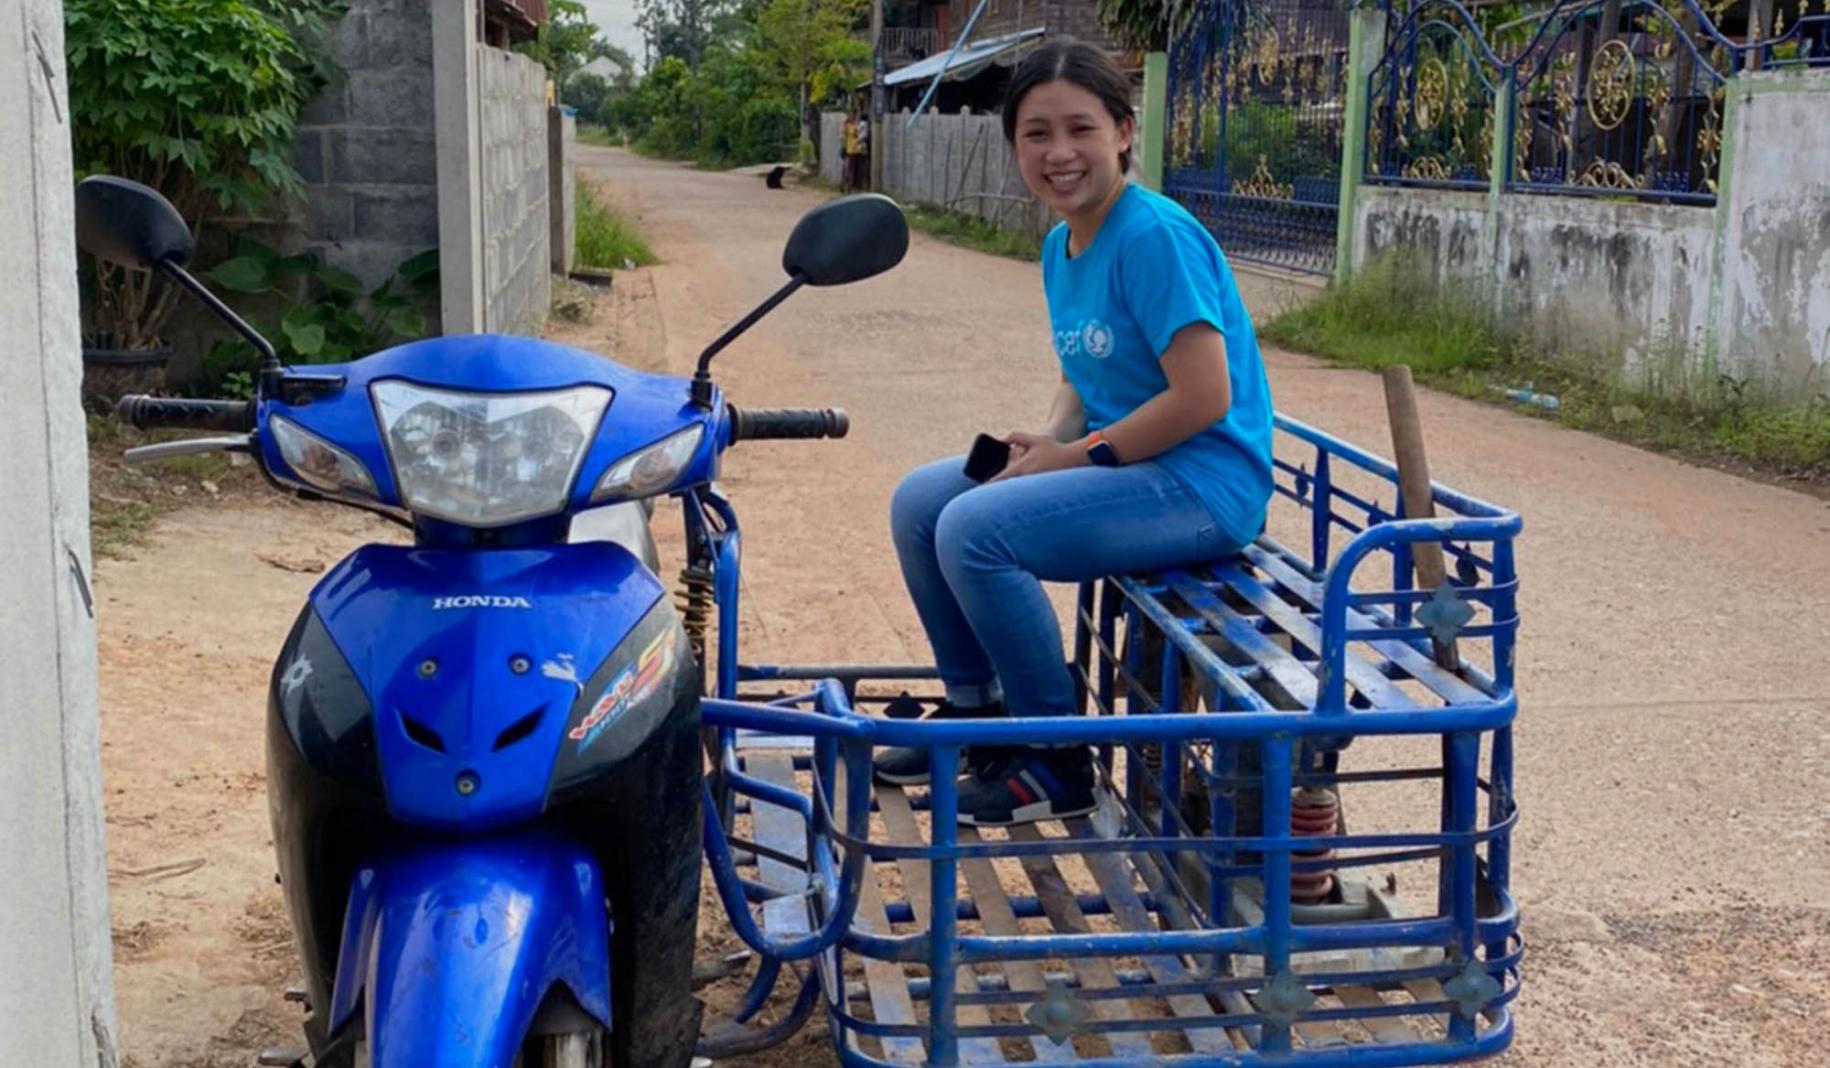 Rasa smiles at the camera as she sits on the side cart of a motorcycle at her work.